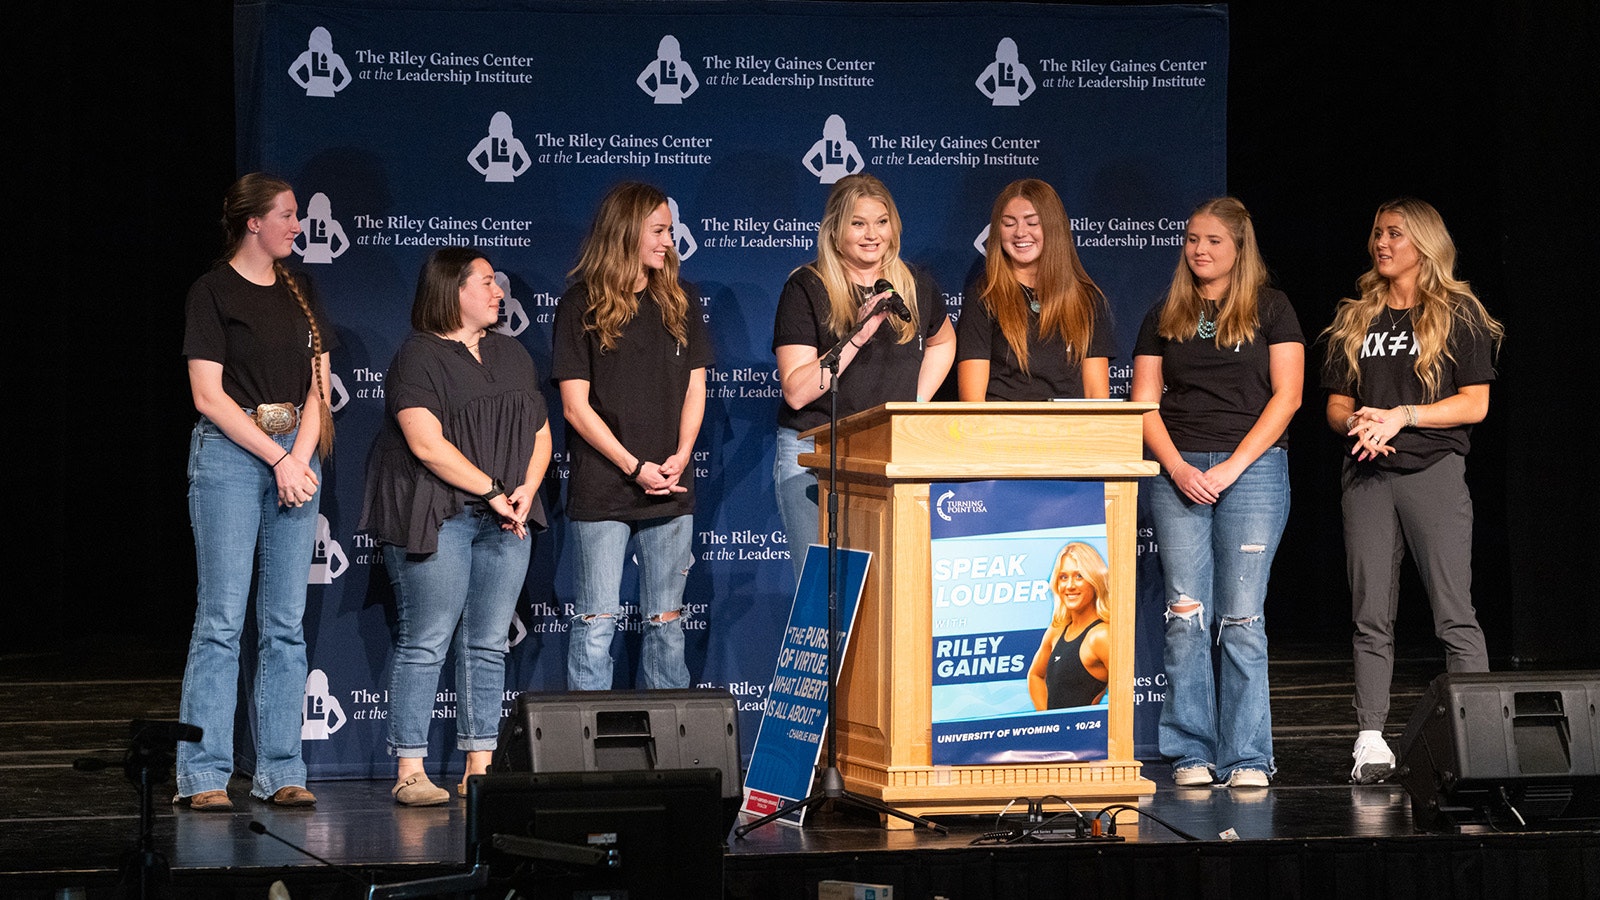 Six University of Wyoming Kappa Kappa Gamma chapter members who sued over admitting a transgender member on stage with Riley Gaines, far right, on Tuesday.